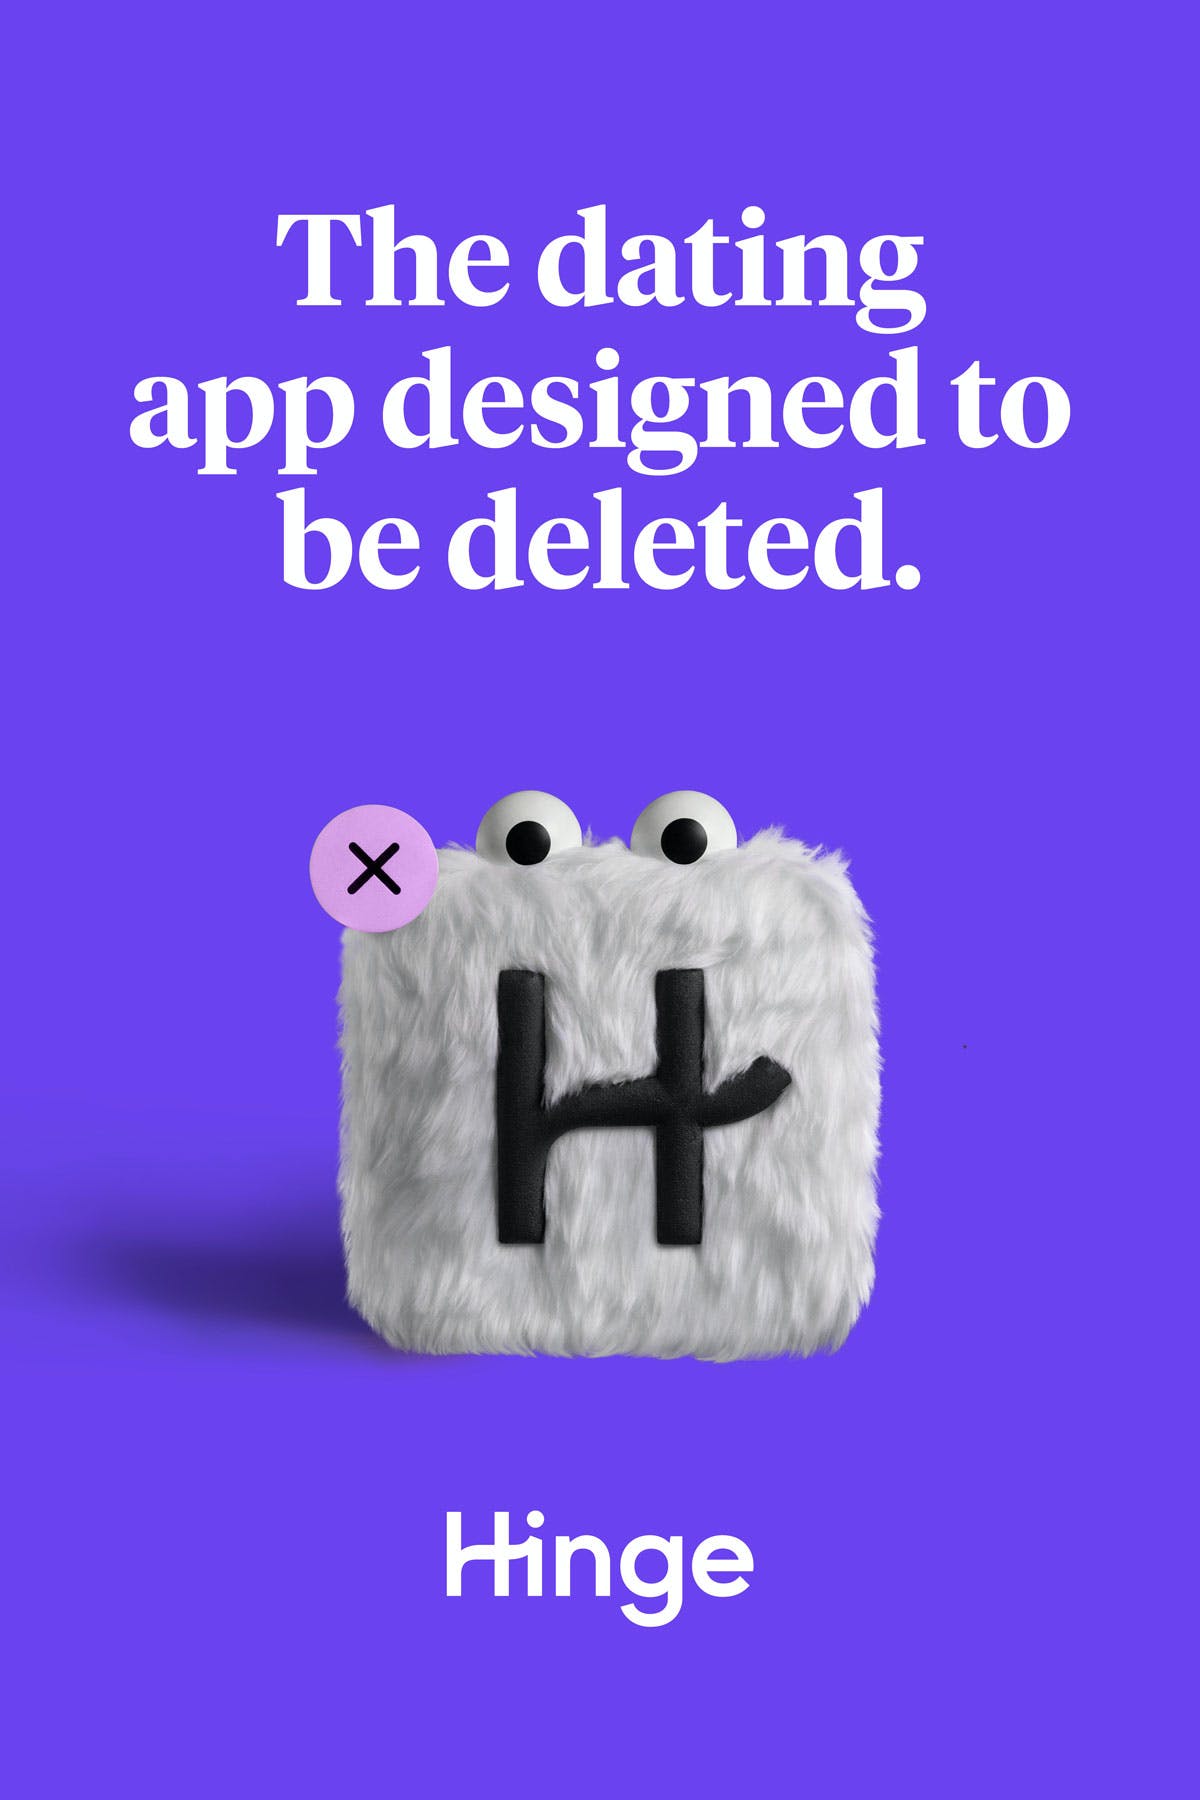 Creative Marketing Campaign by Hinge Dating app